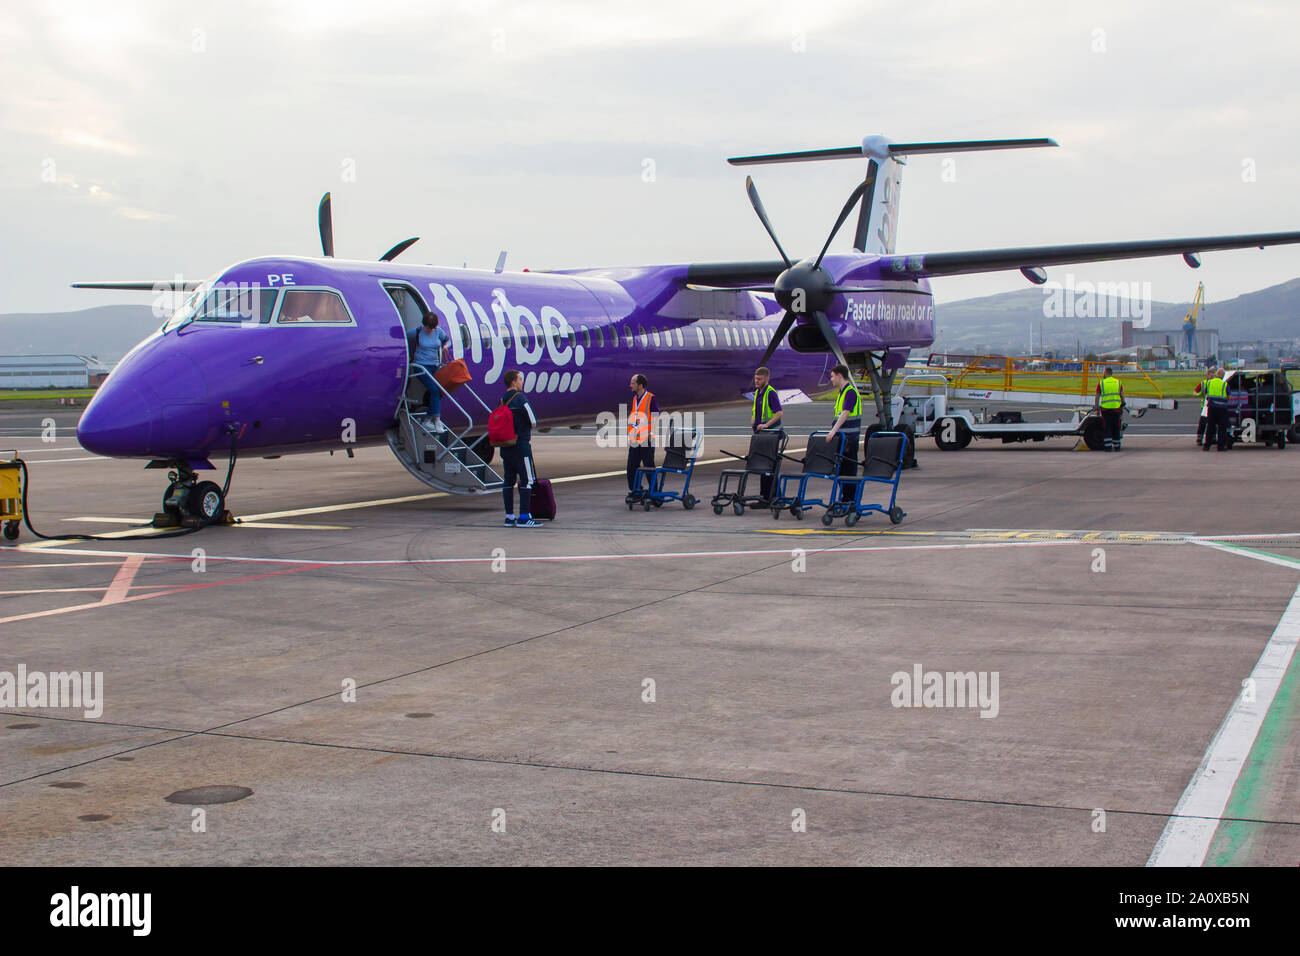 21 September 2019 A FlyBe Dash 8 Commercial Airliner with luggage and passenger handlers on the apron at George Best City Airport in Belfast Northern Stock Photo